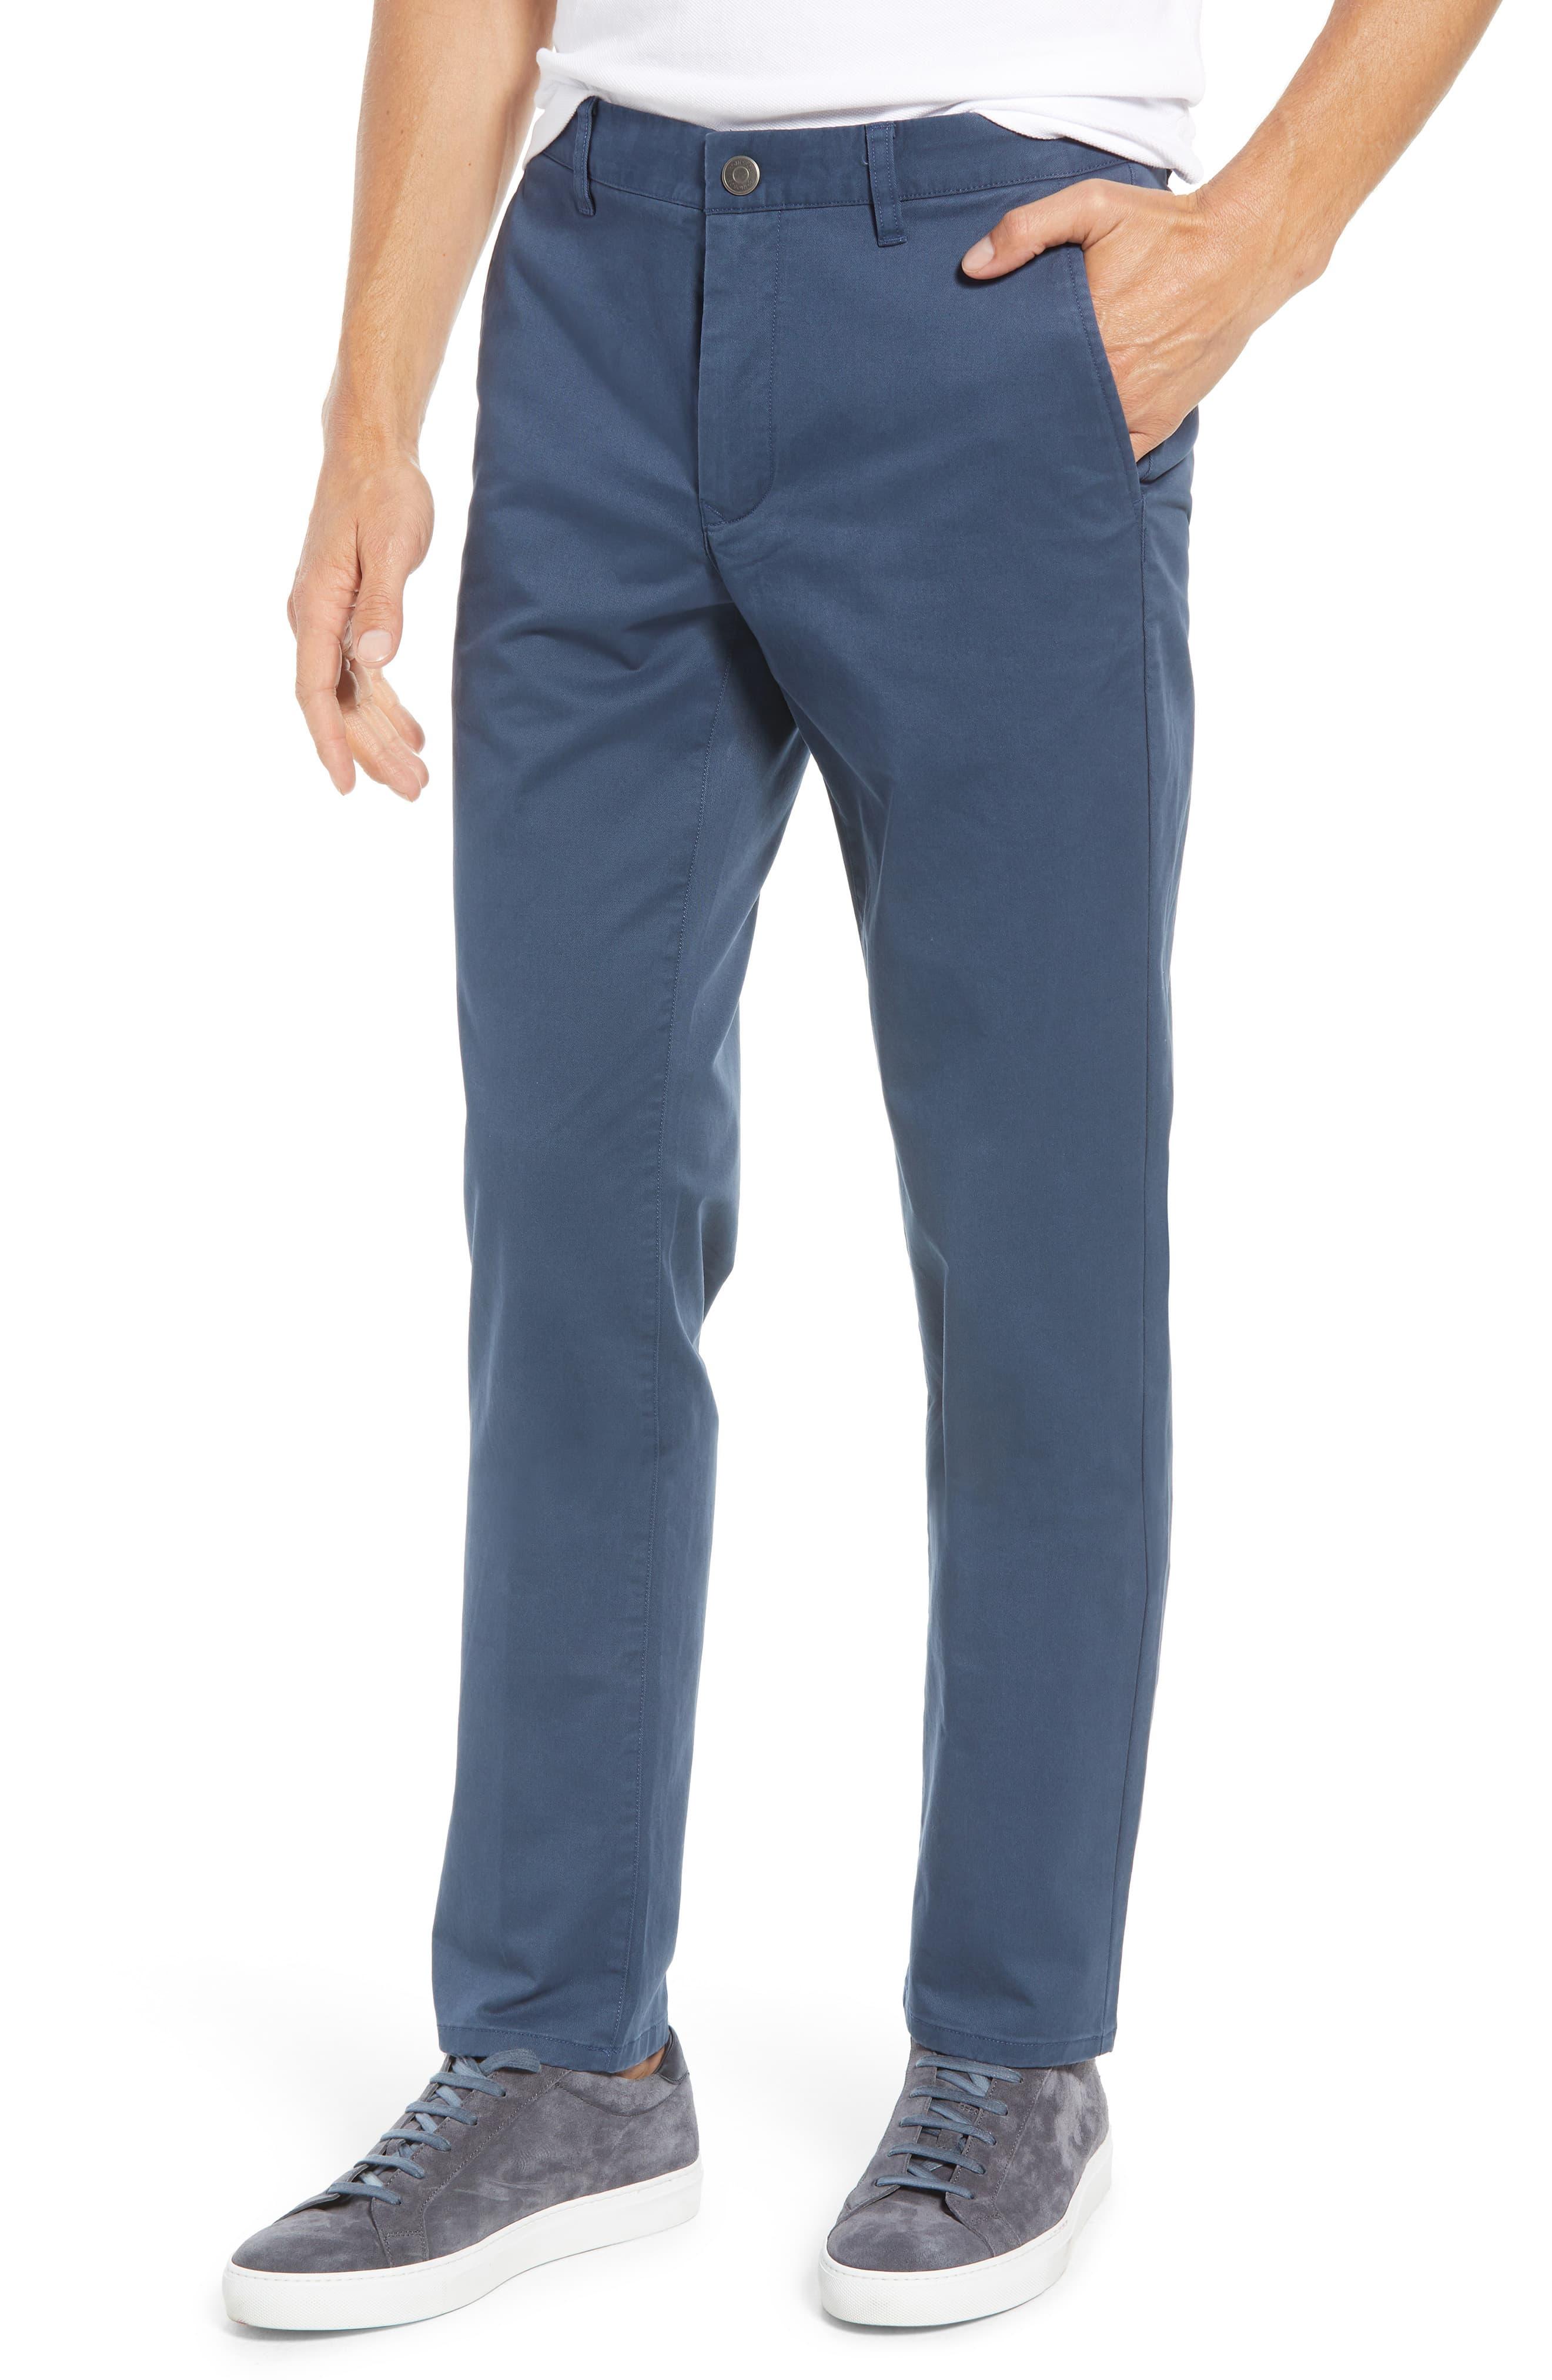 Bonobos Slim Fit Stretch Washed Chinos in Blue for Men - Save 10% - Lyst